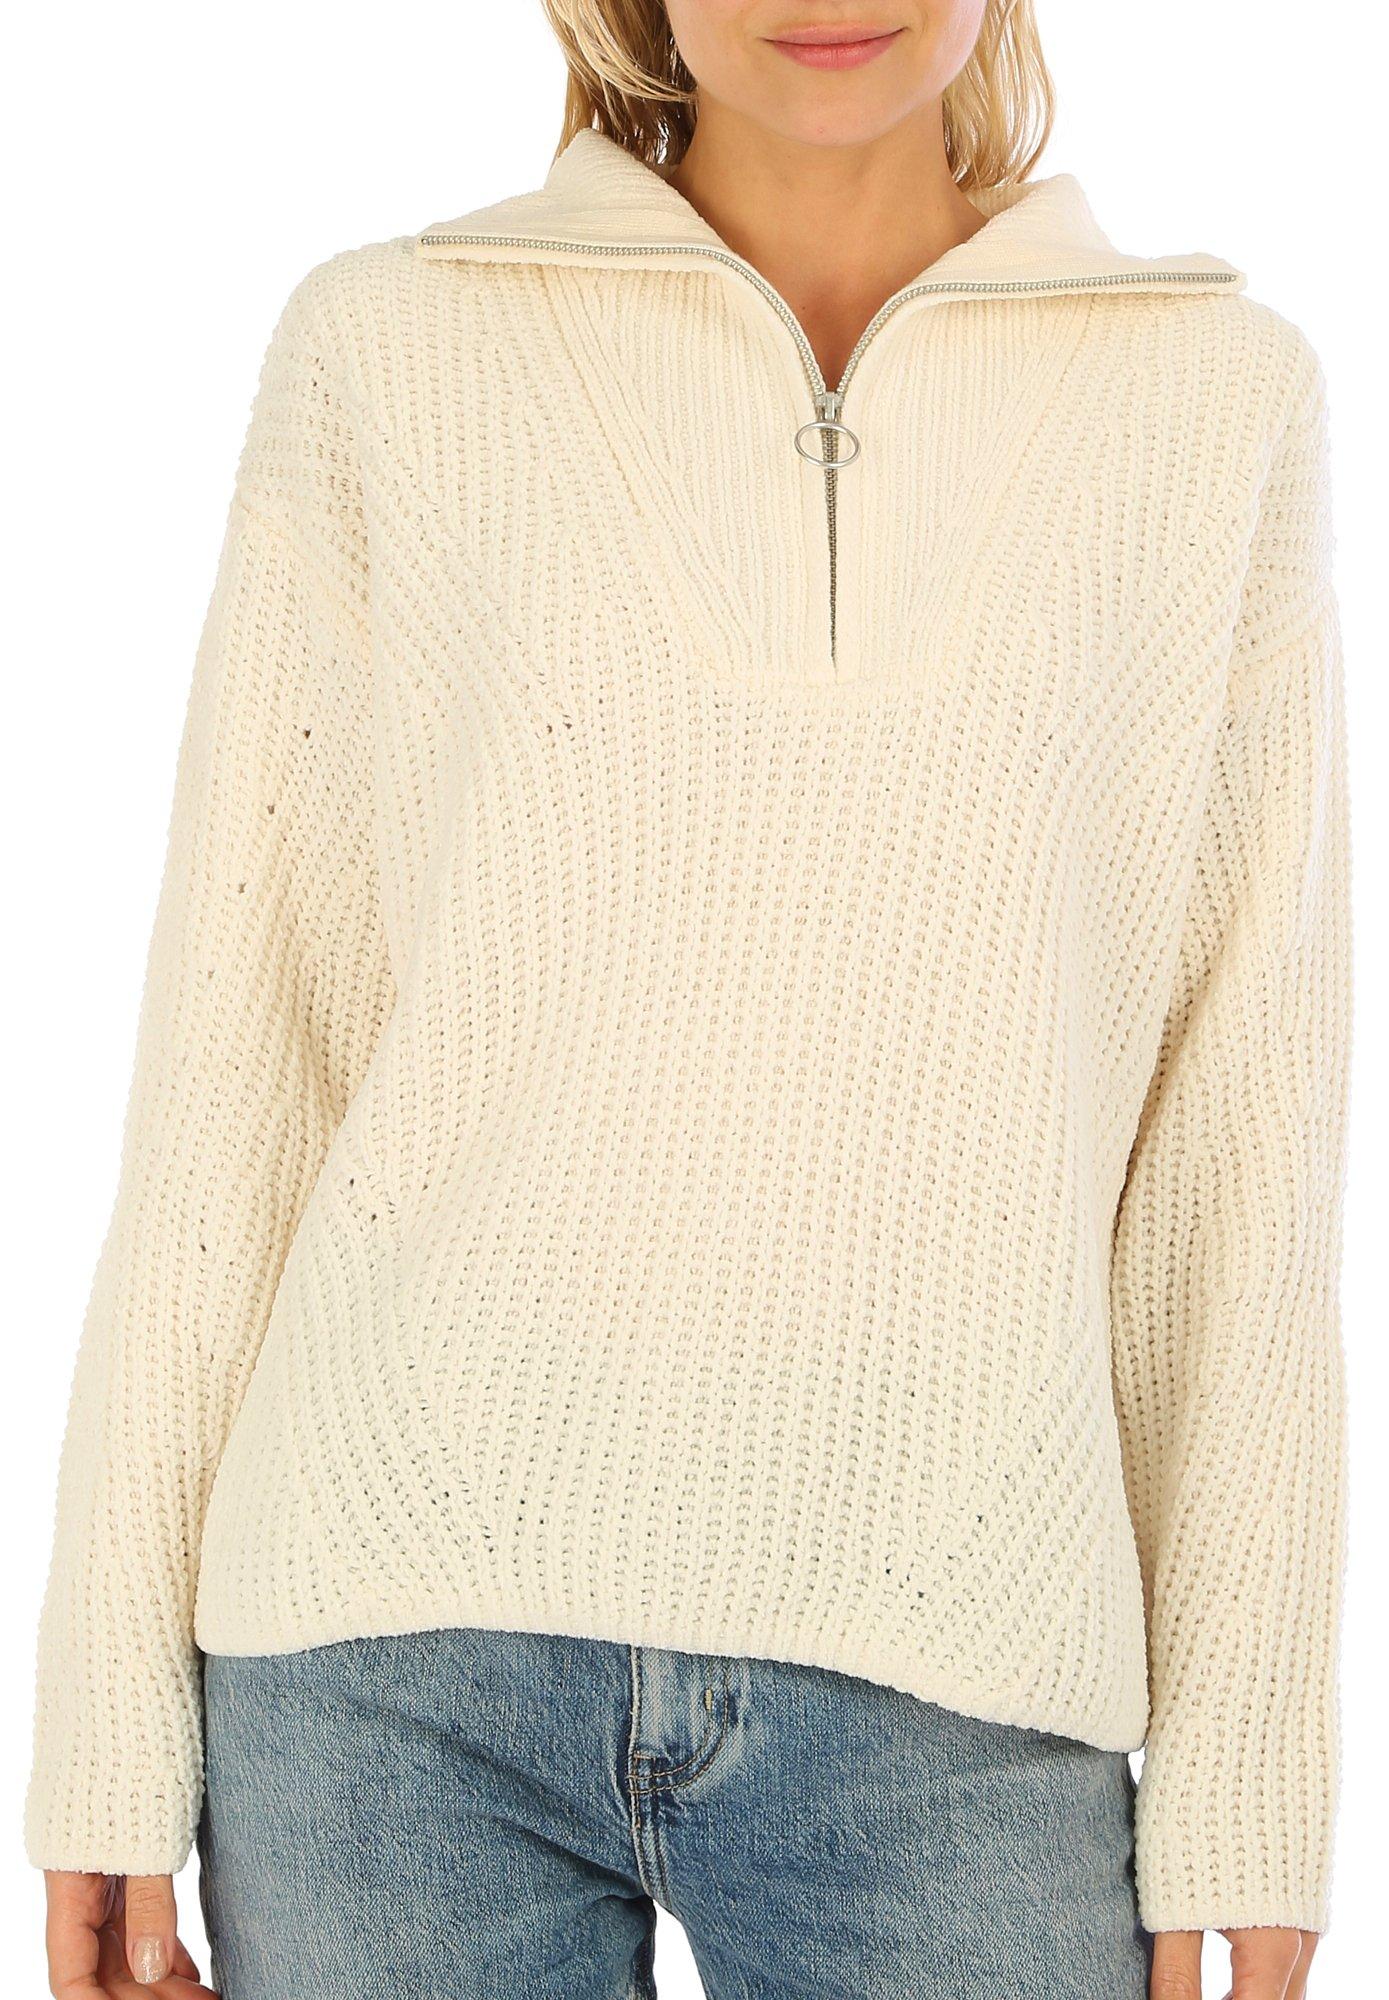 Juniors Solid Cable Knit Zip Sweater